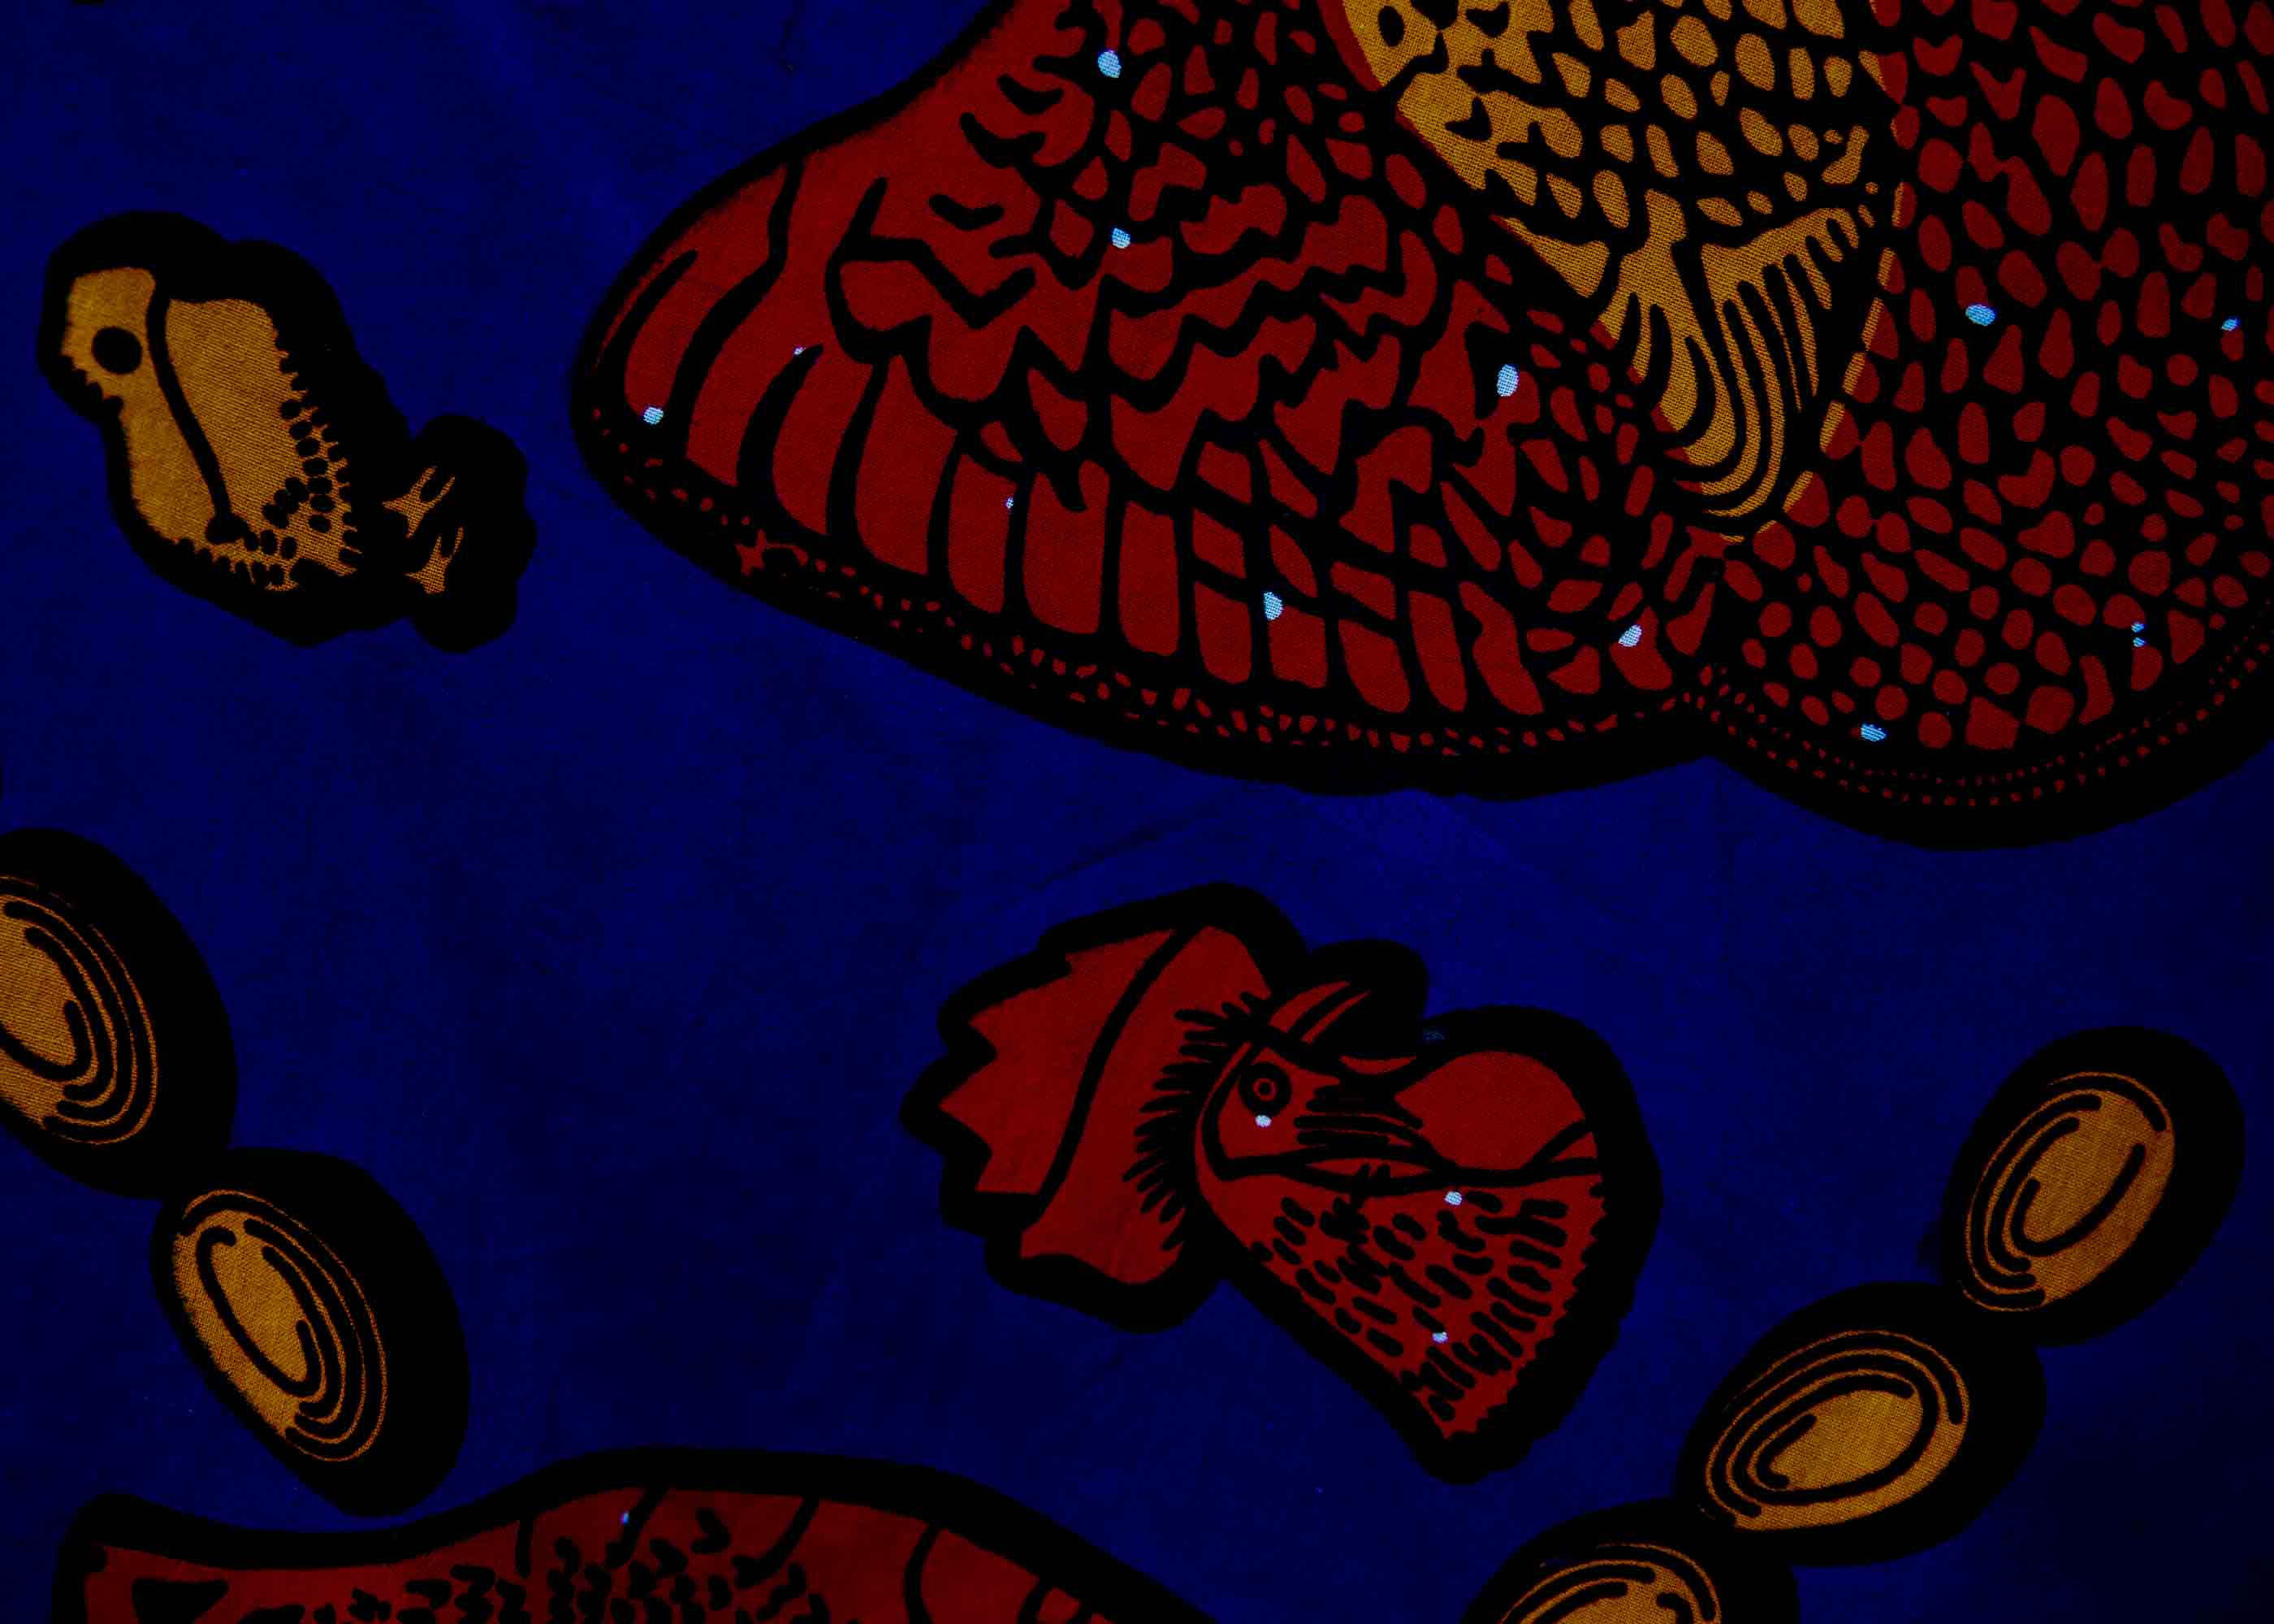 display of a rooster and chick design dress in blue, red and orange